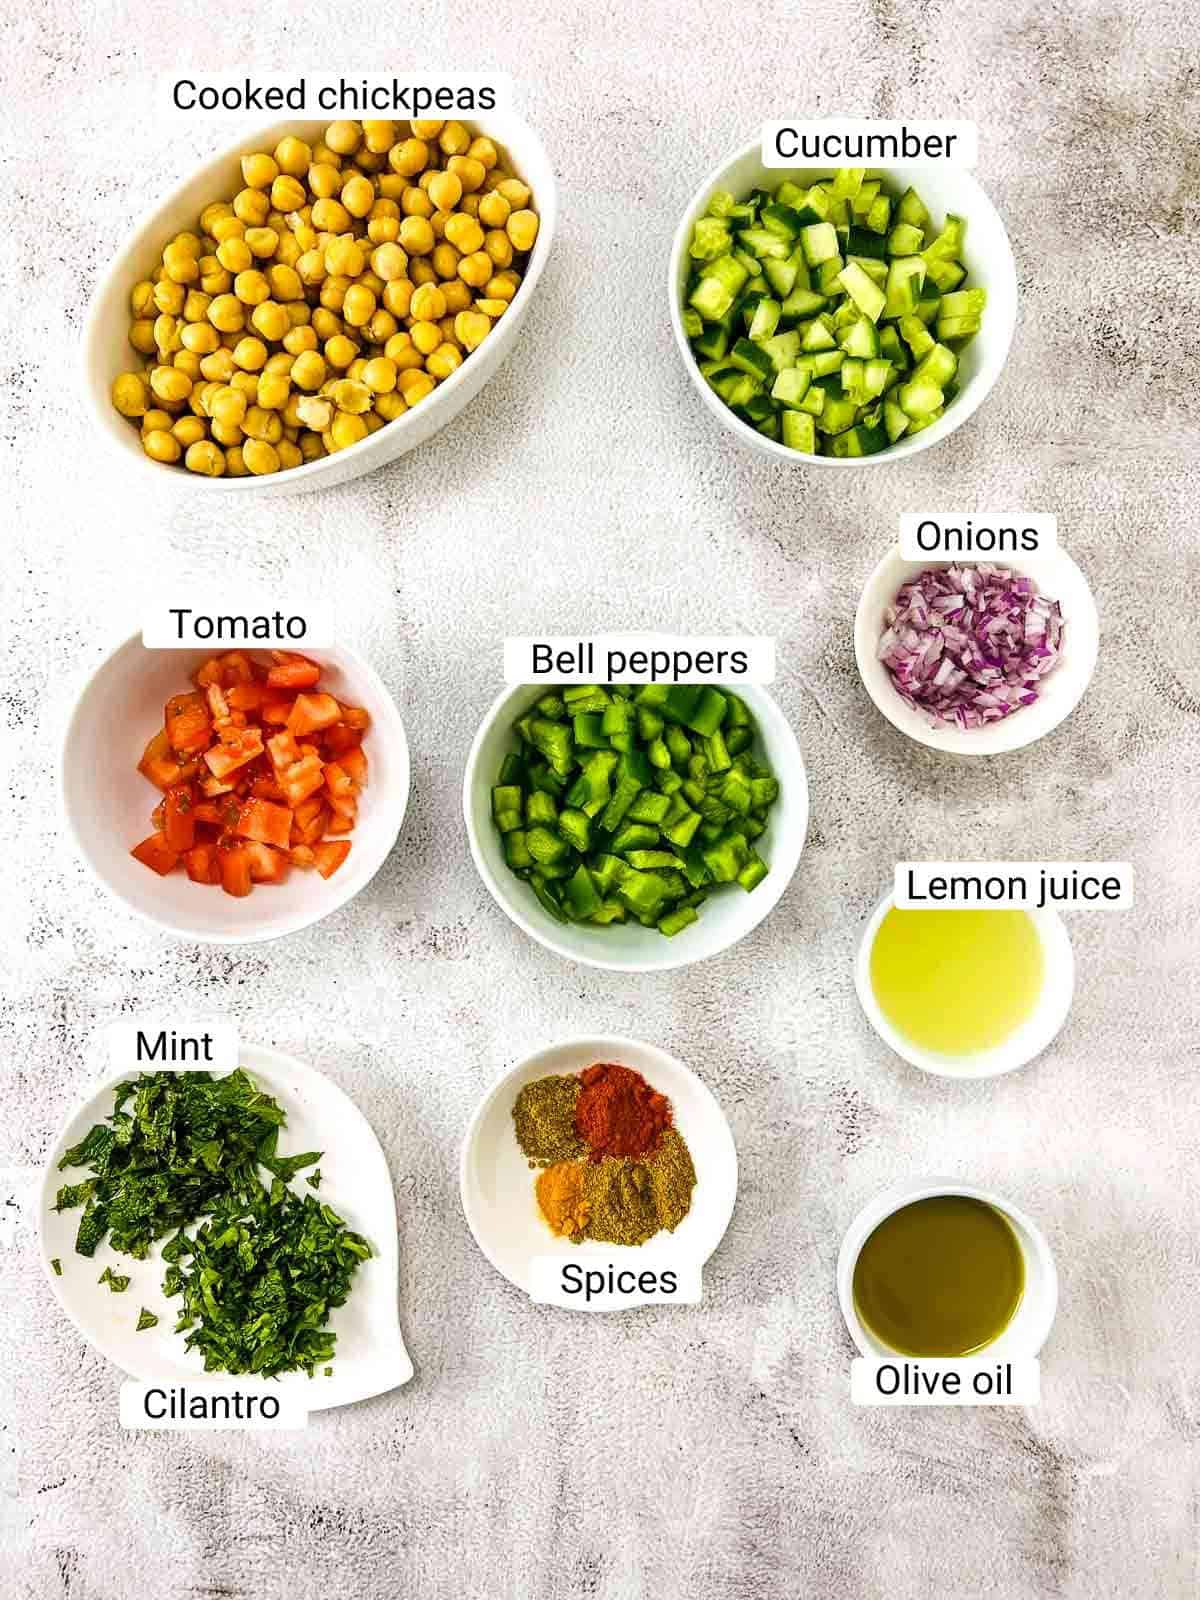 Ingredients to make chickpea salad on a white surface.